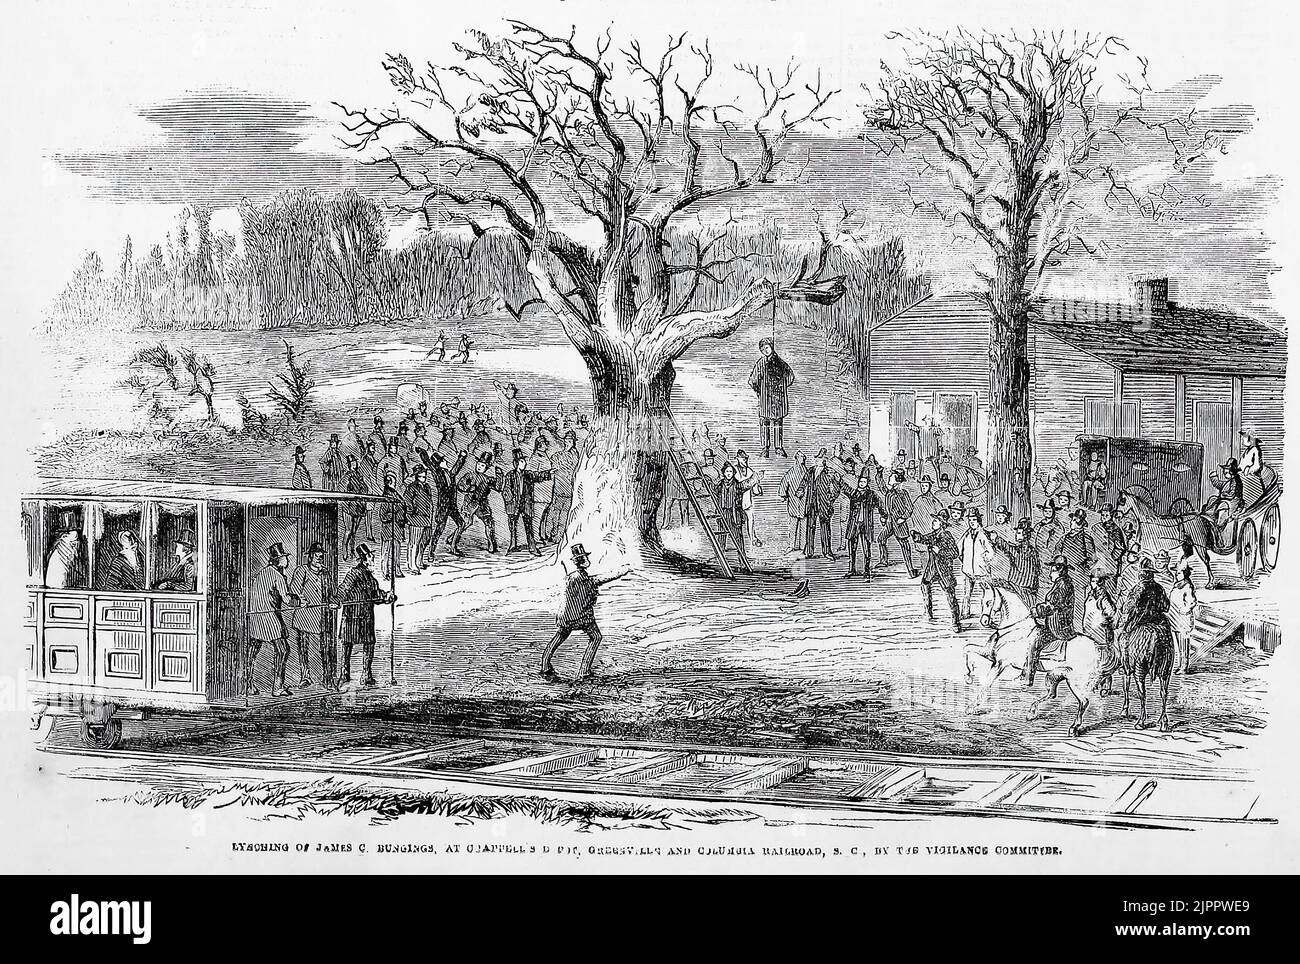 Lynching of James C. Bungings, abolitionist, at Chappell's Depot, South Carolina, by the Vigilance Committee, 6.. Februar 1860. 19.. Jahrhundert Illustration aus Frank Leslie's Illustrated Newspaper Stockfoto